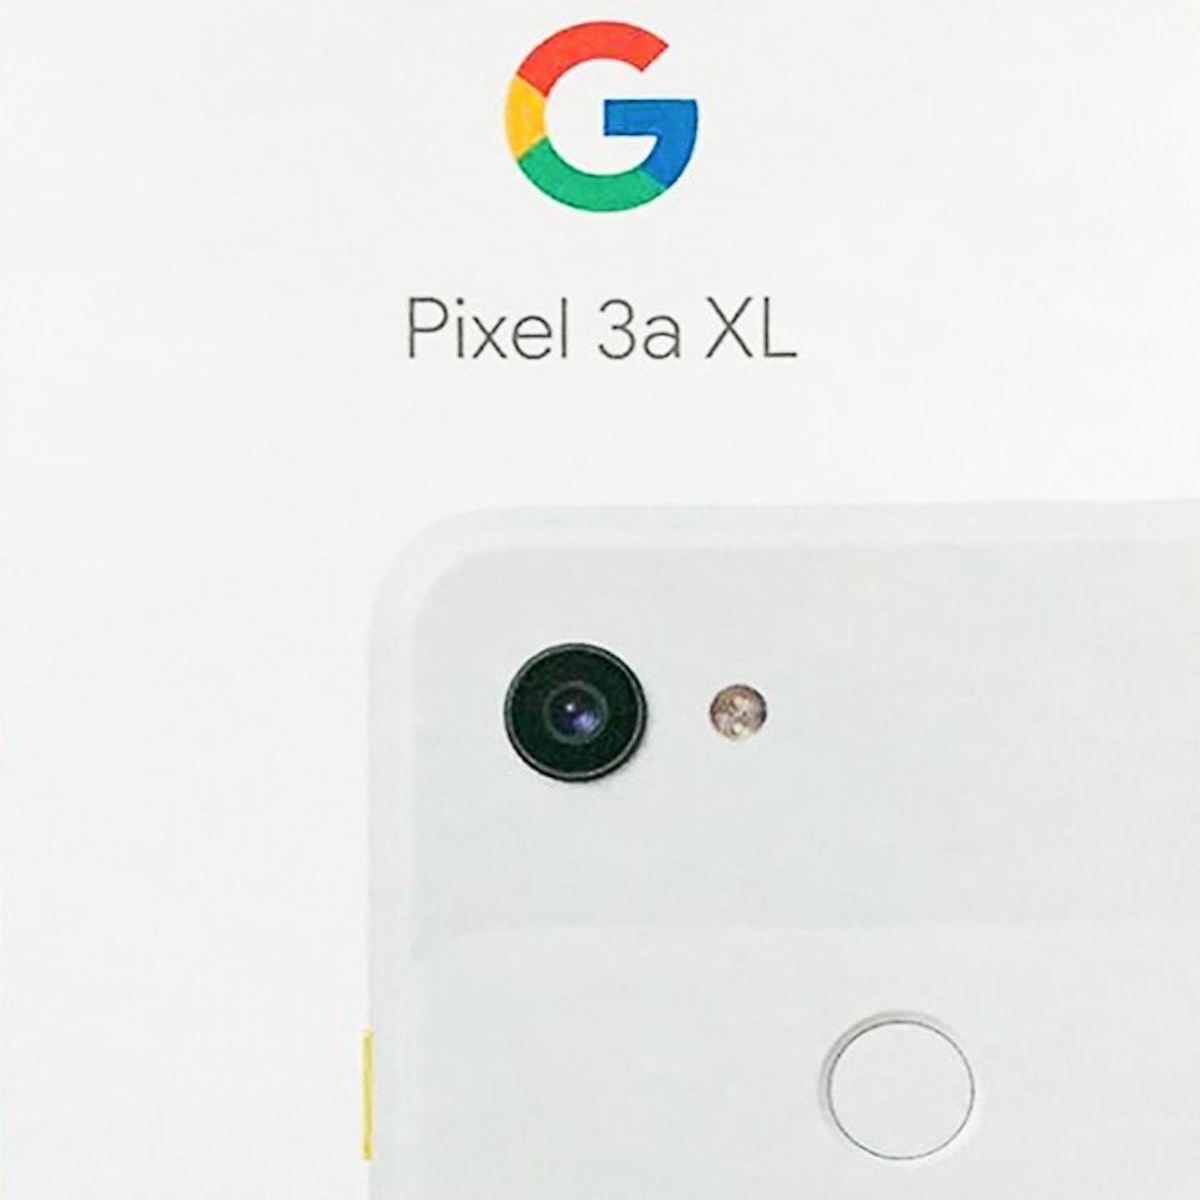 How much power will the Google Pixel 3a pack?